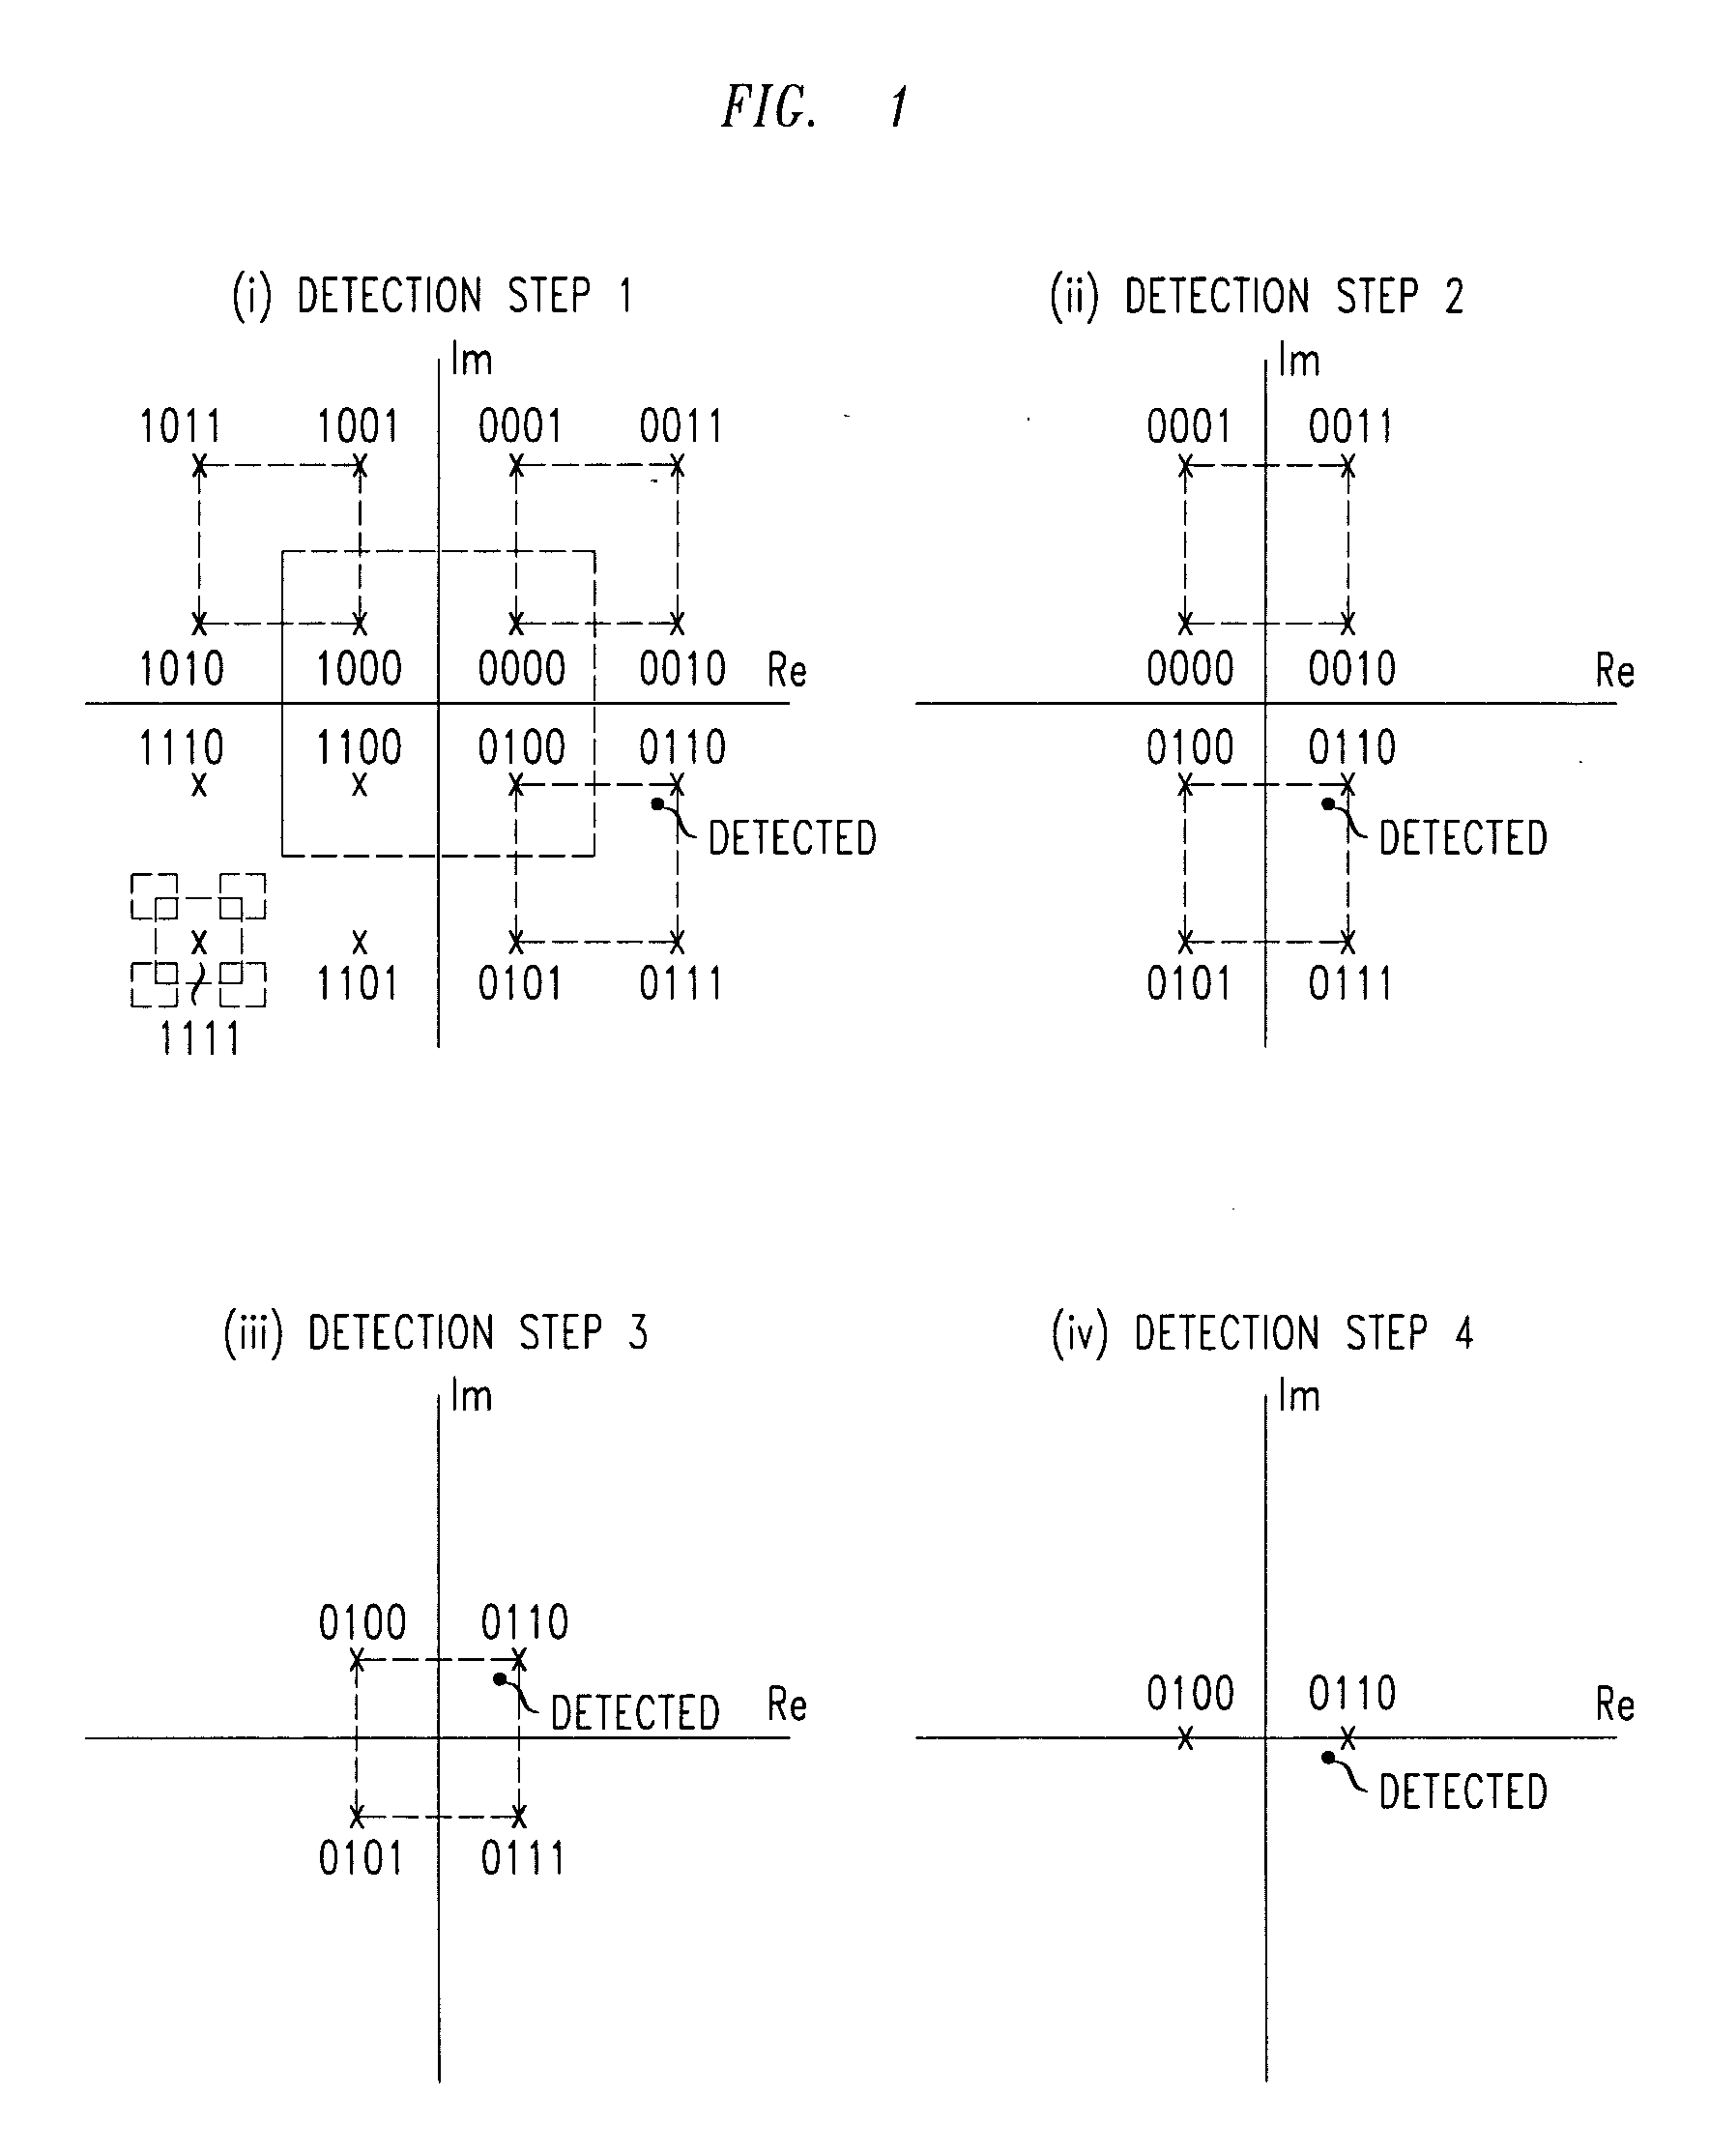 Modulation in a mobile telecommunications system